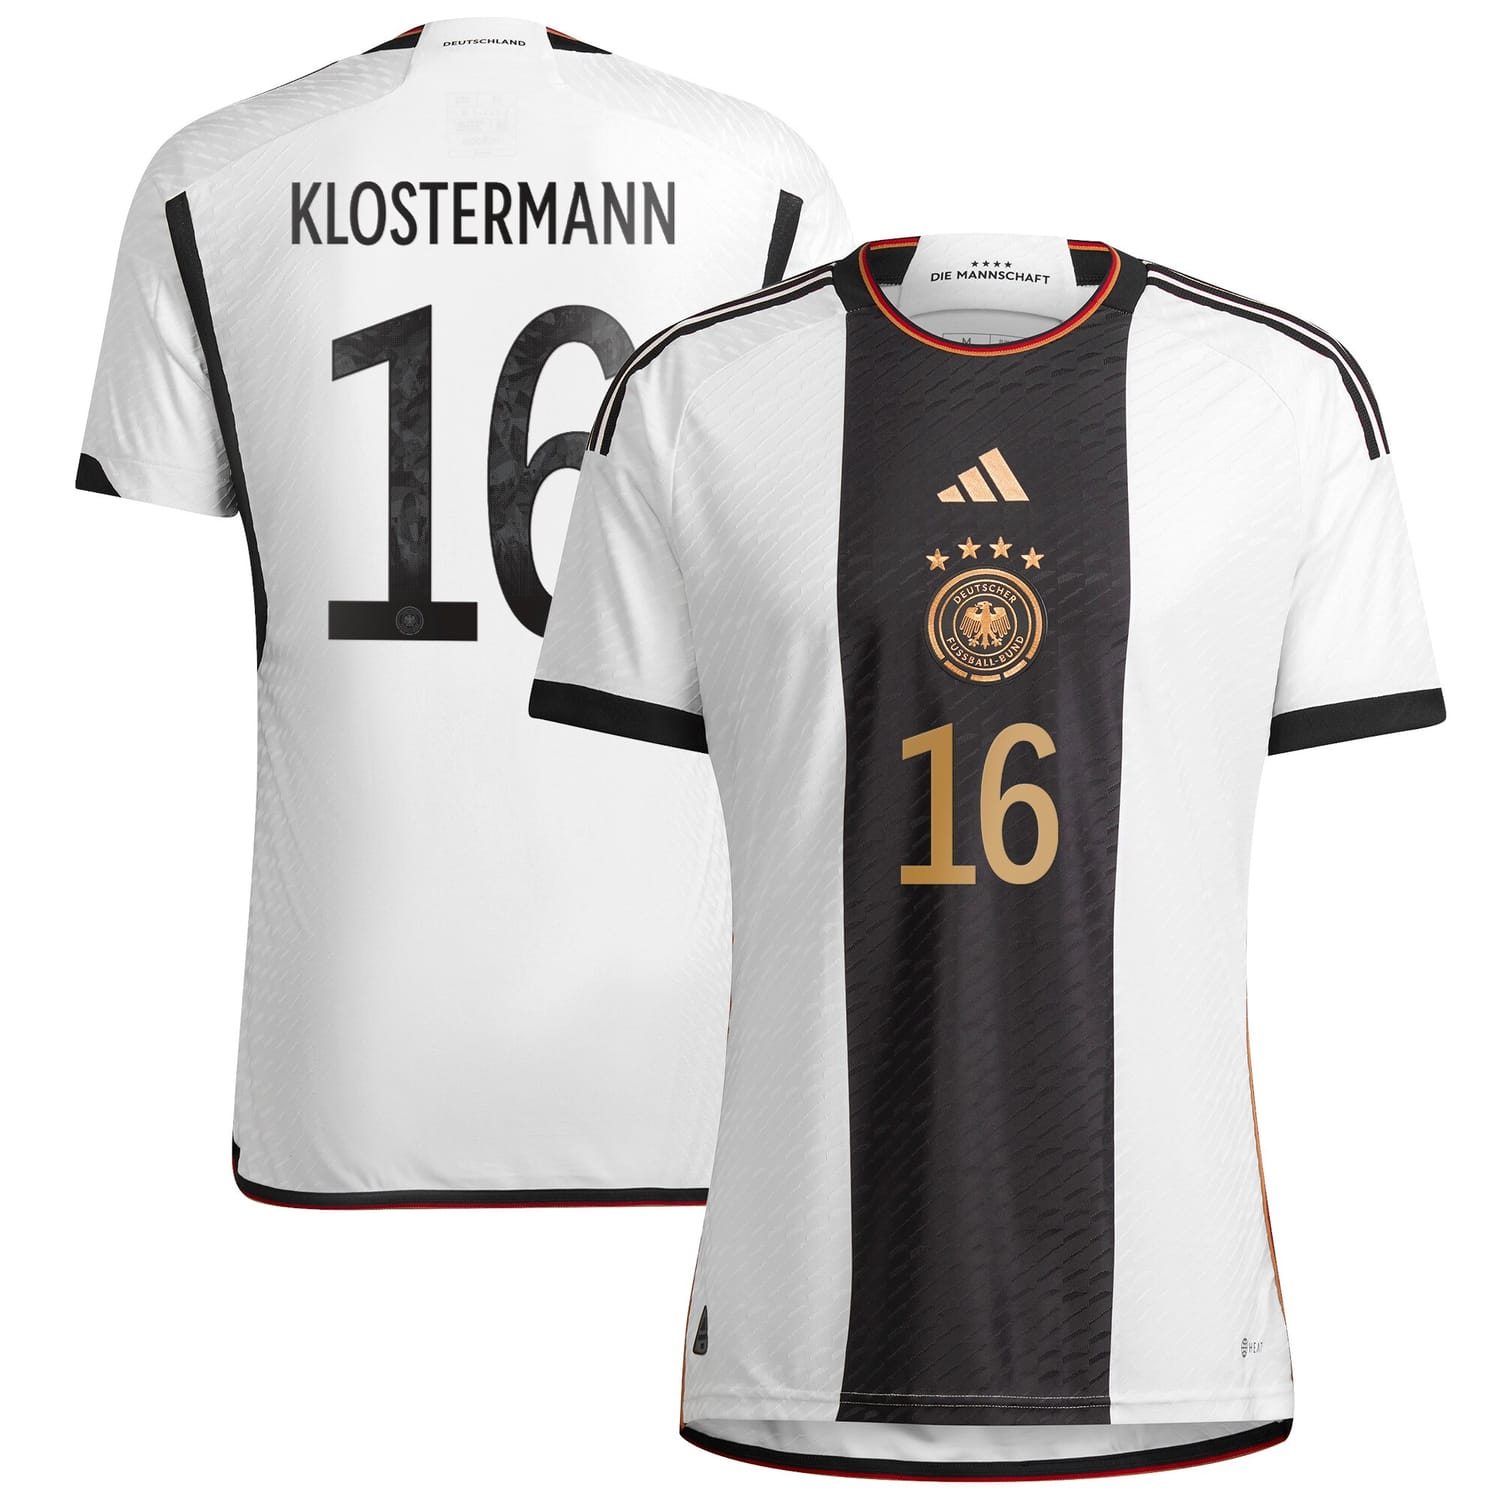 Germany National Team Home Authentic Jersey Shirt player Lukas Klostermann 16 printing for Men